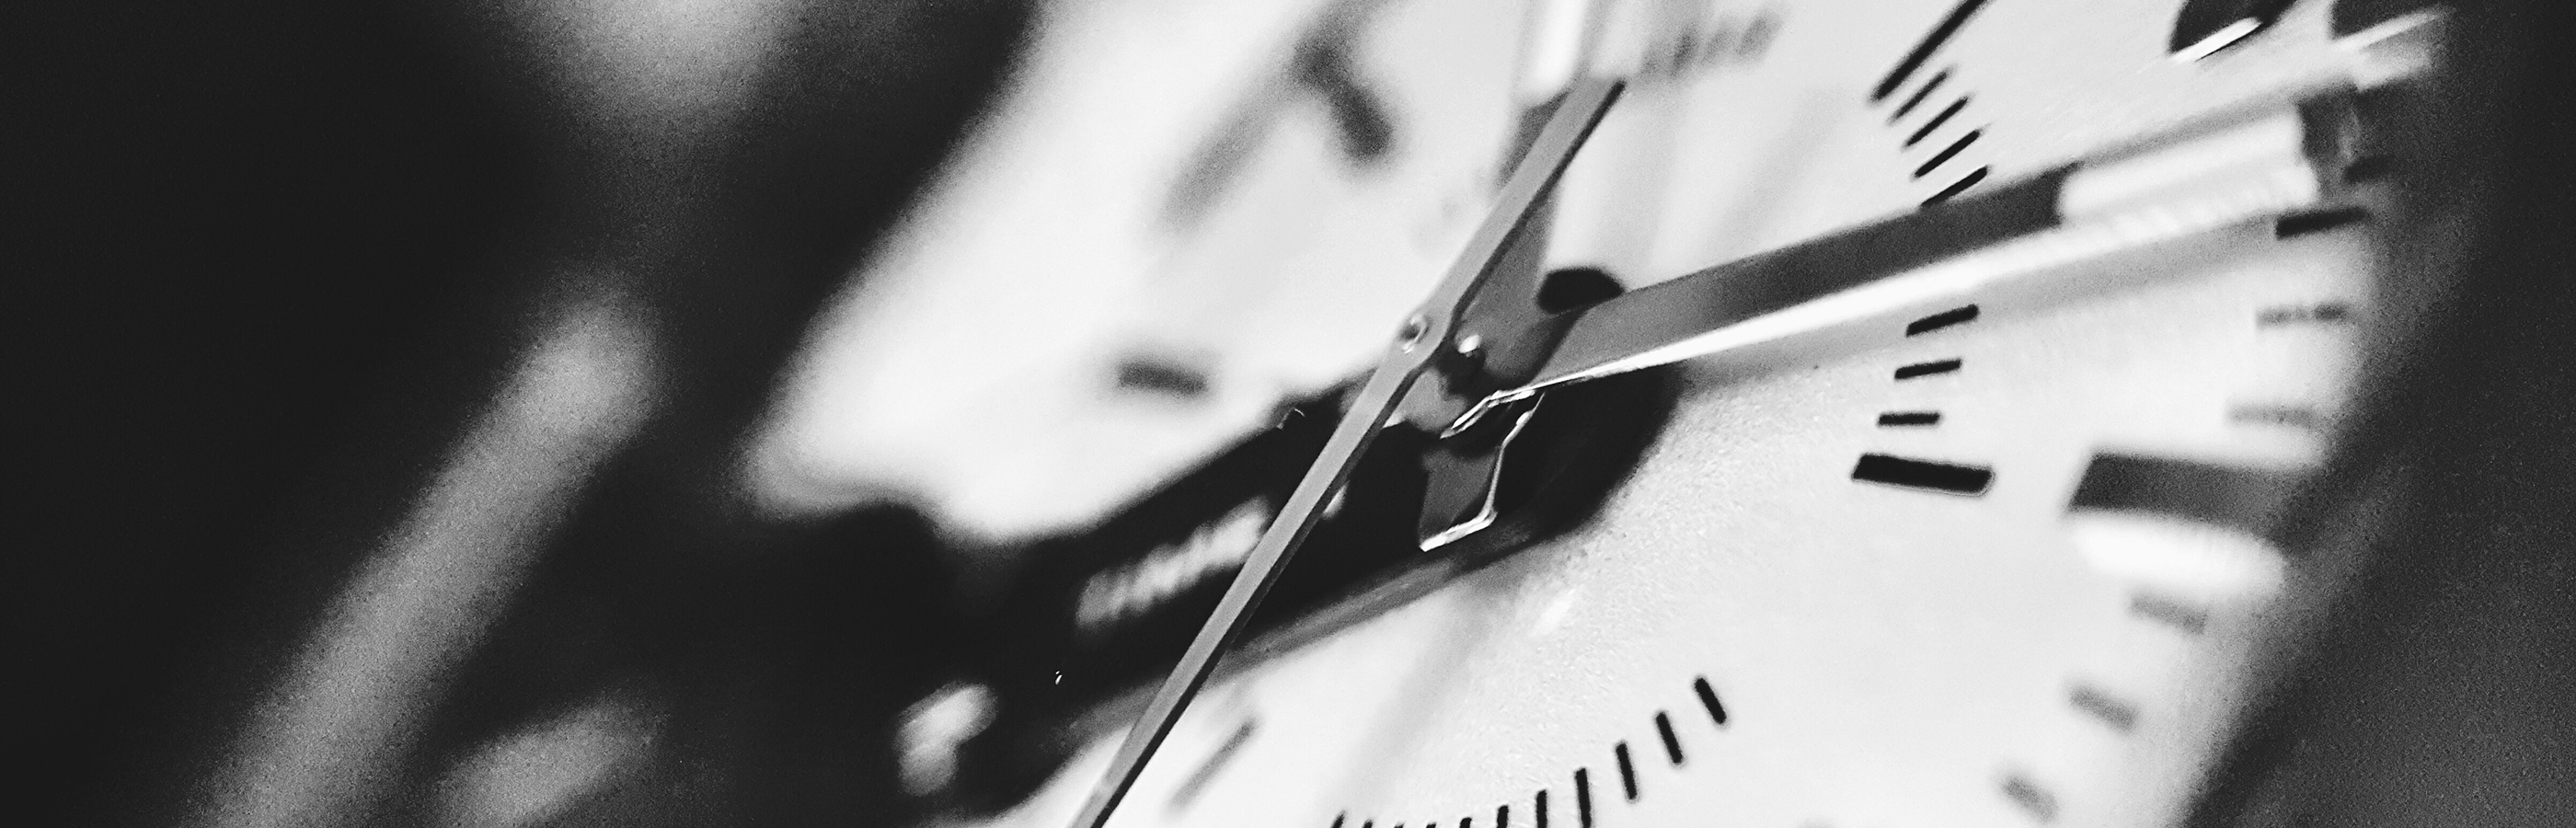 Black and white close up of an analog wall clock